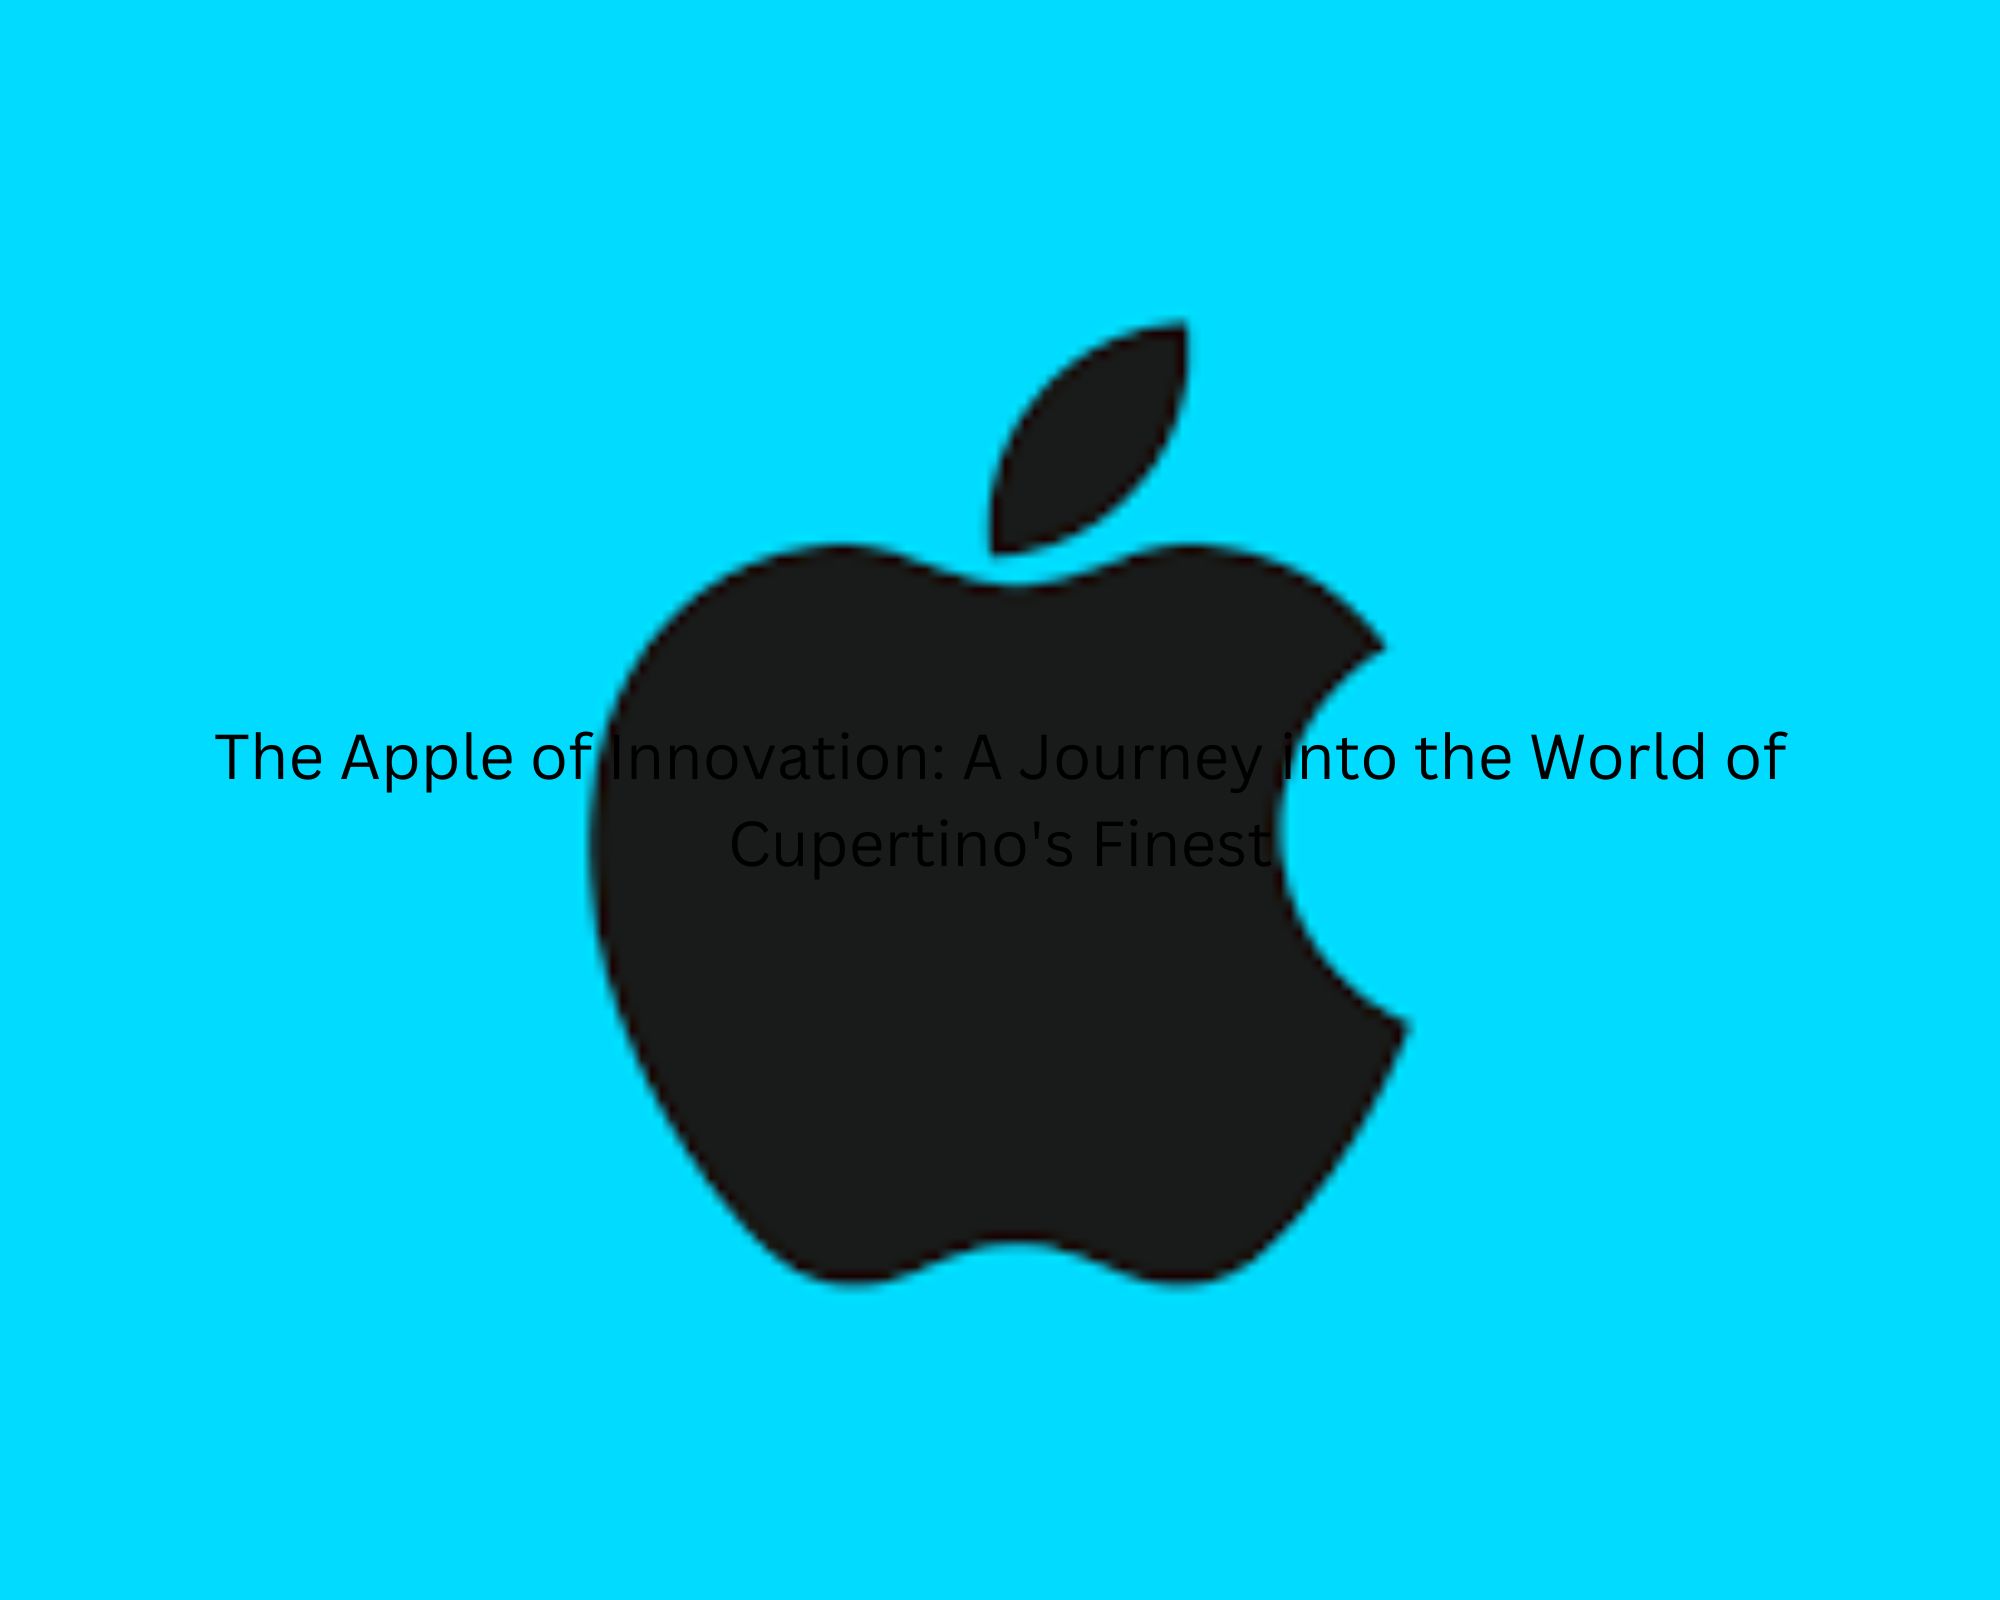 The Apple of Innovation: A Journey into the World of Cupertino's Finest